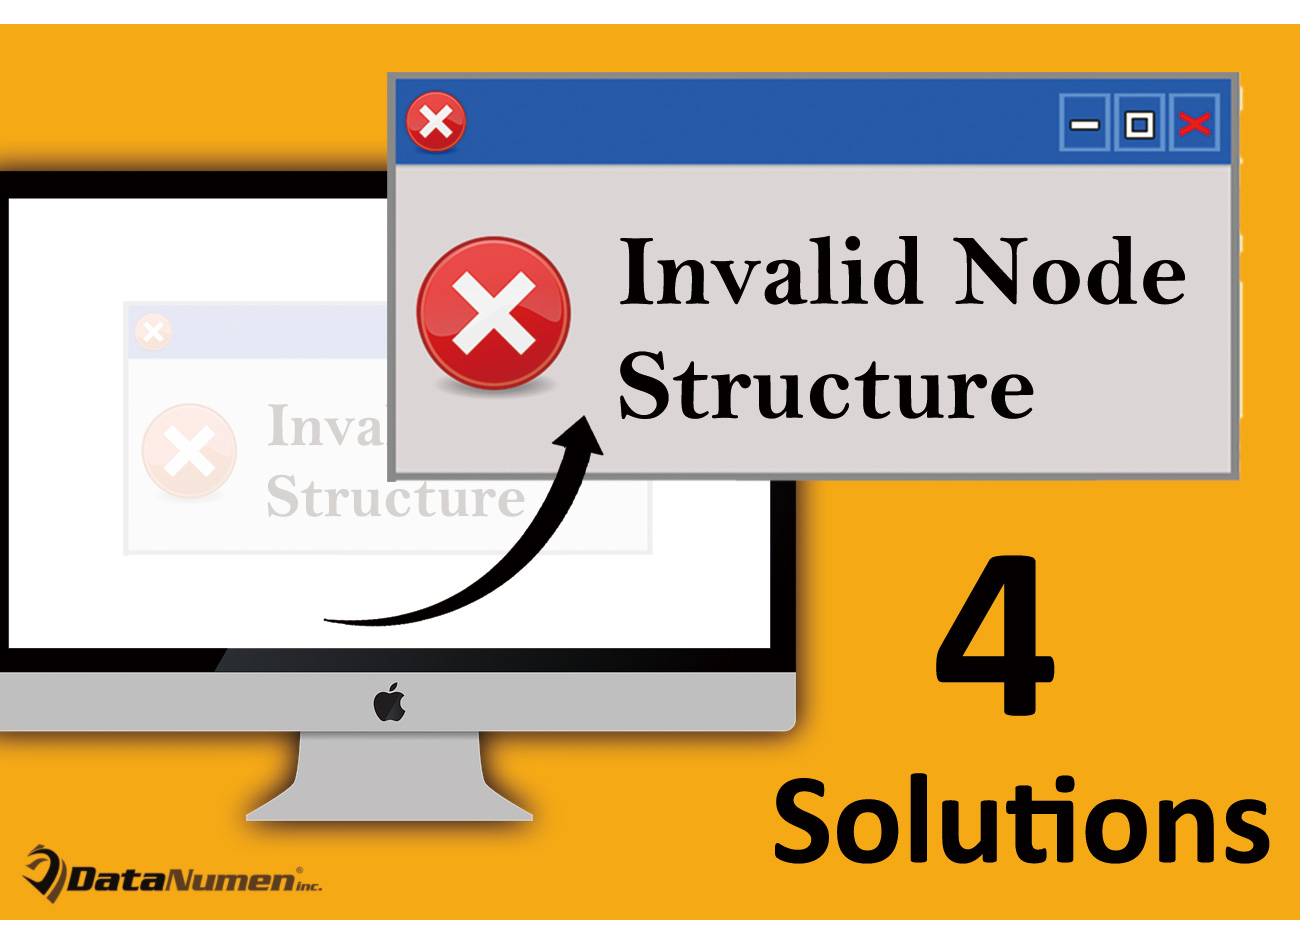 4 Solutions to "Invalid Node Structure" Error on Mac System